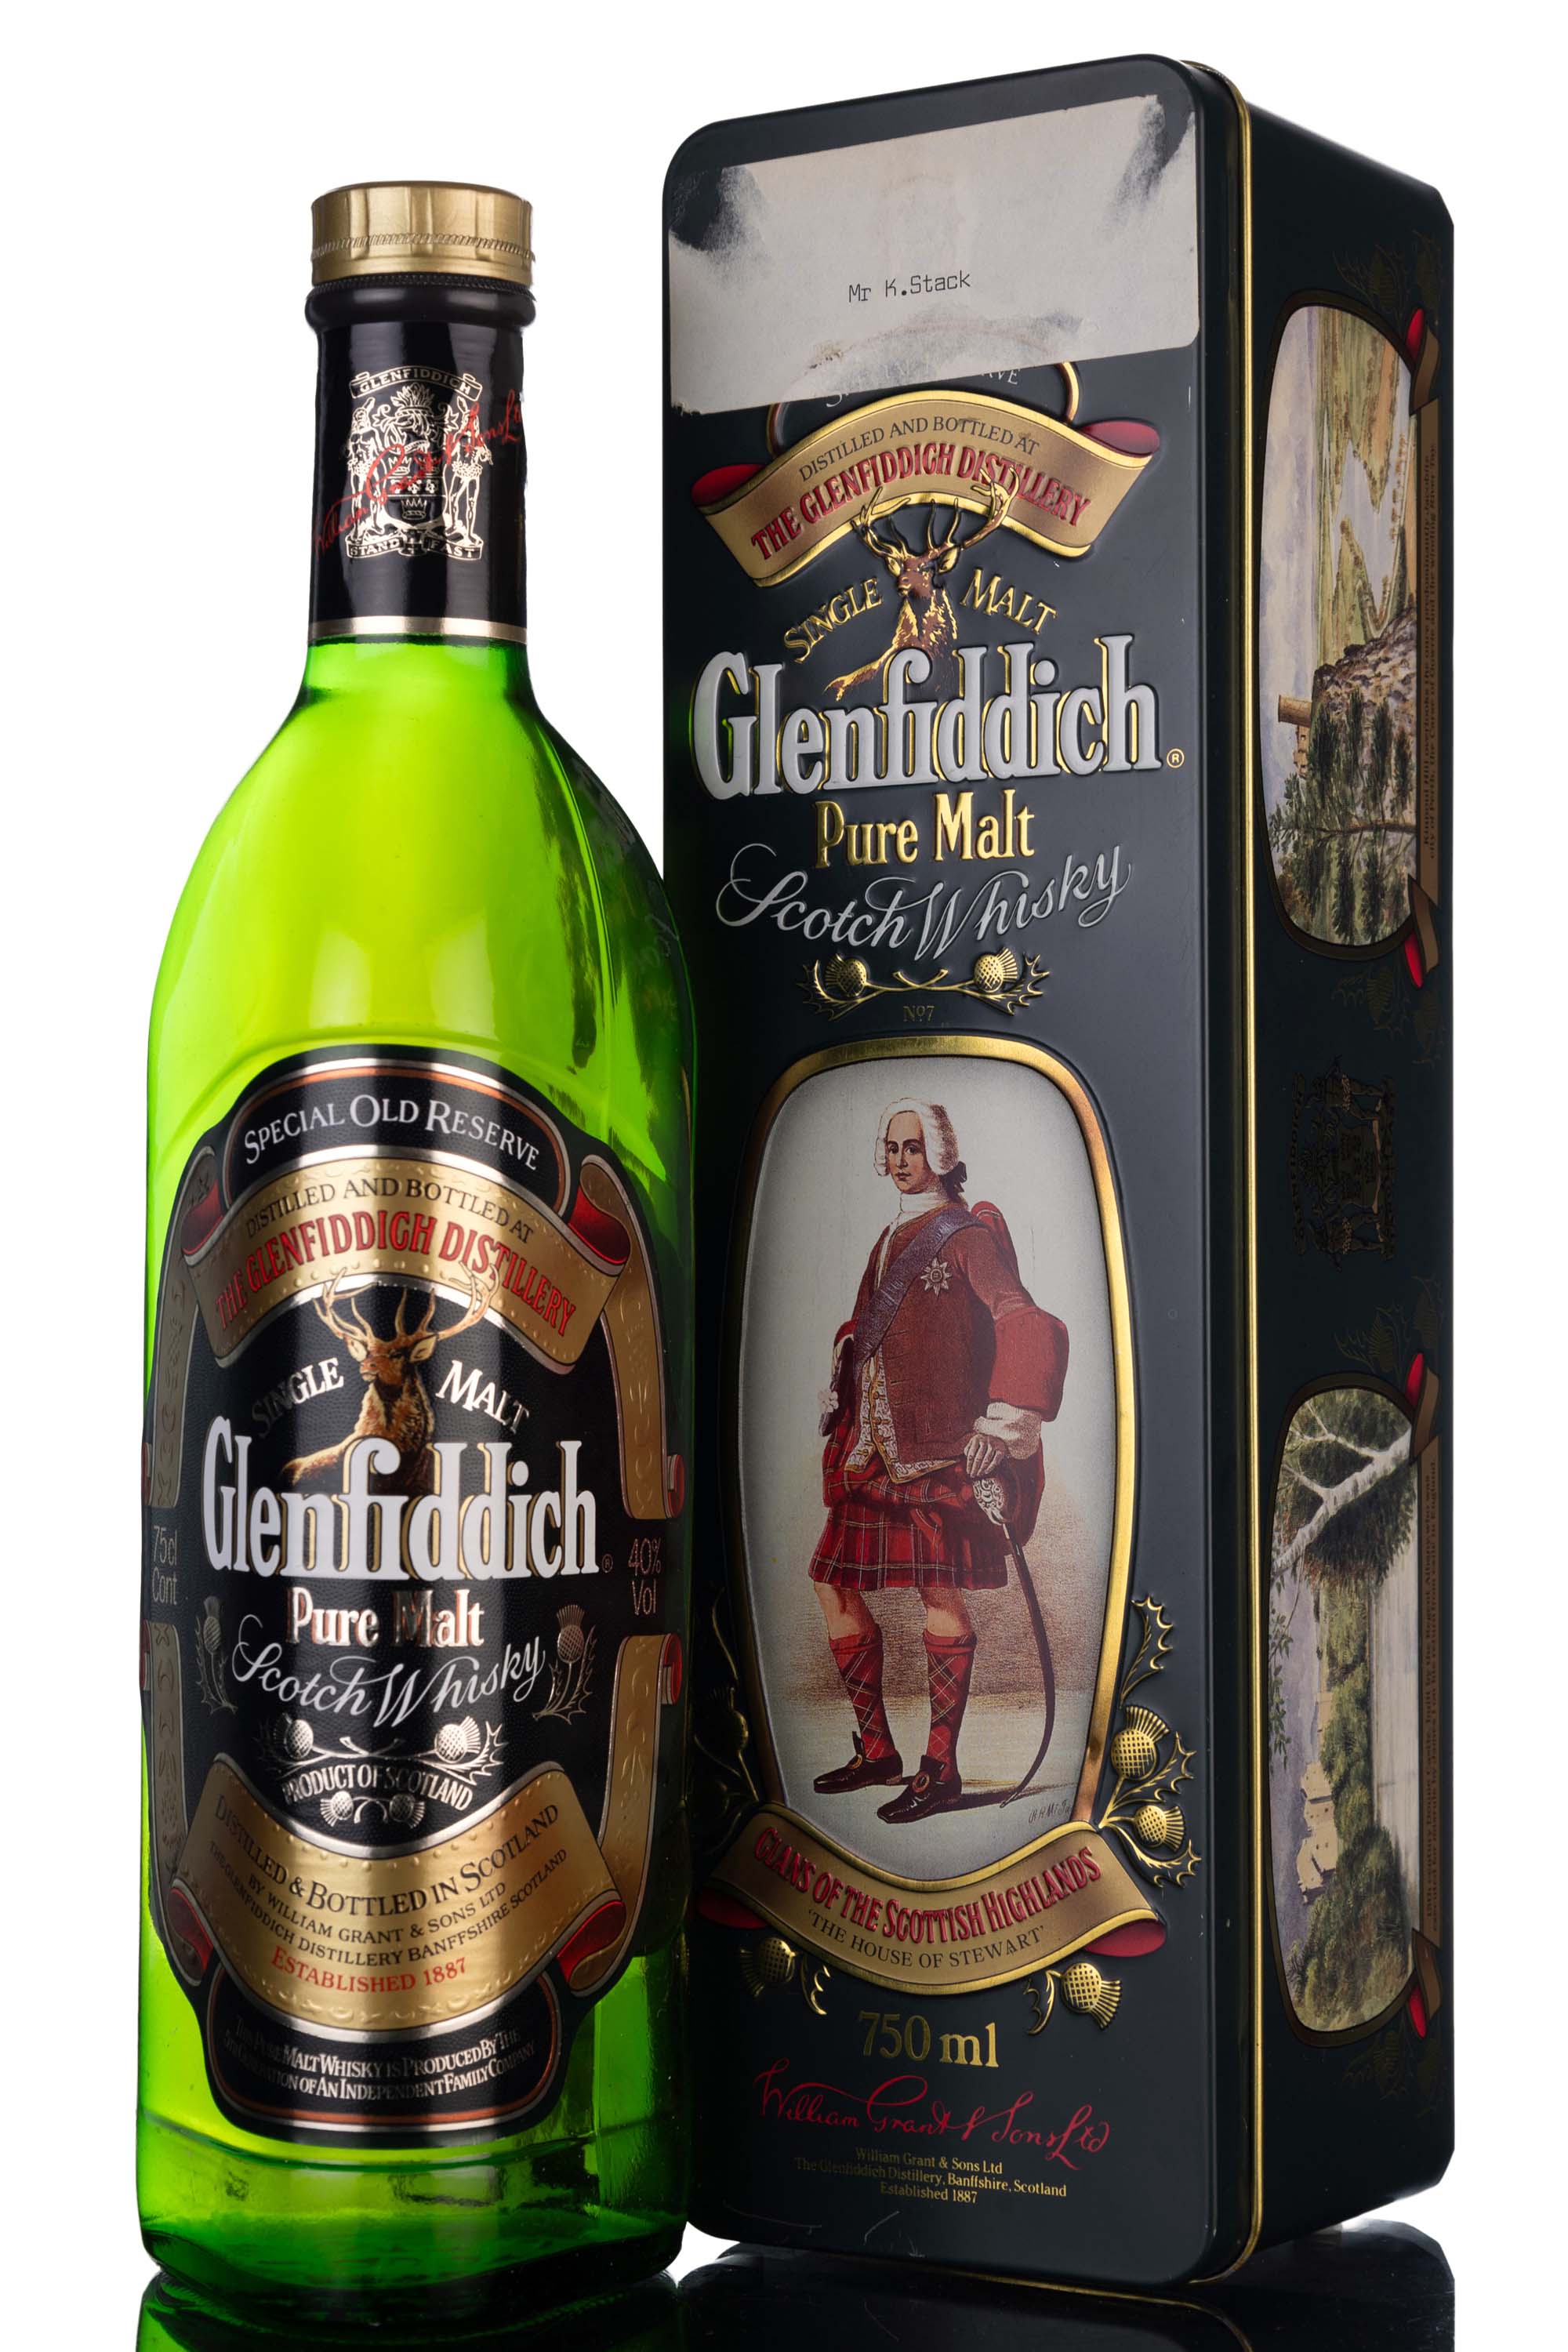 Glenfiddich Special Old Reserve - 1980s